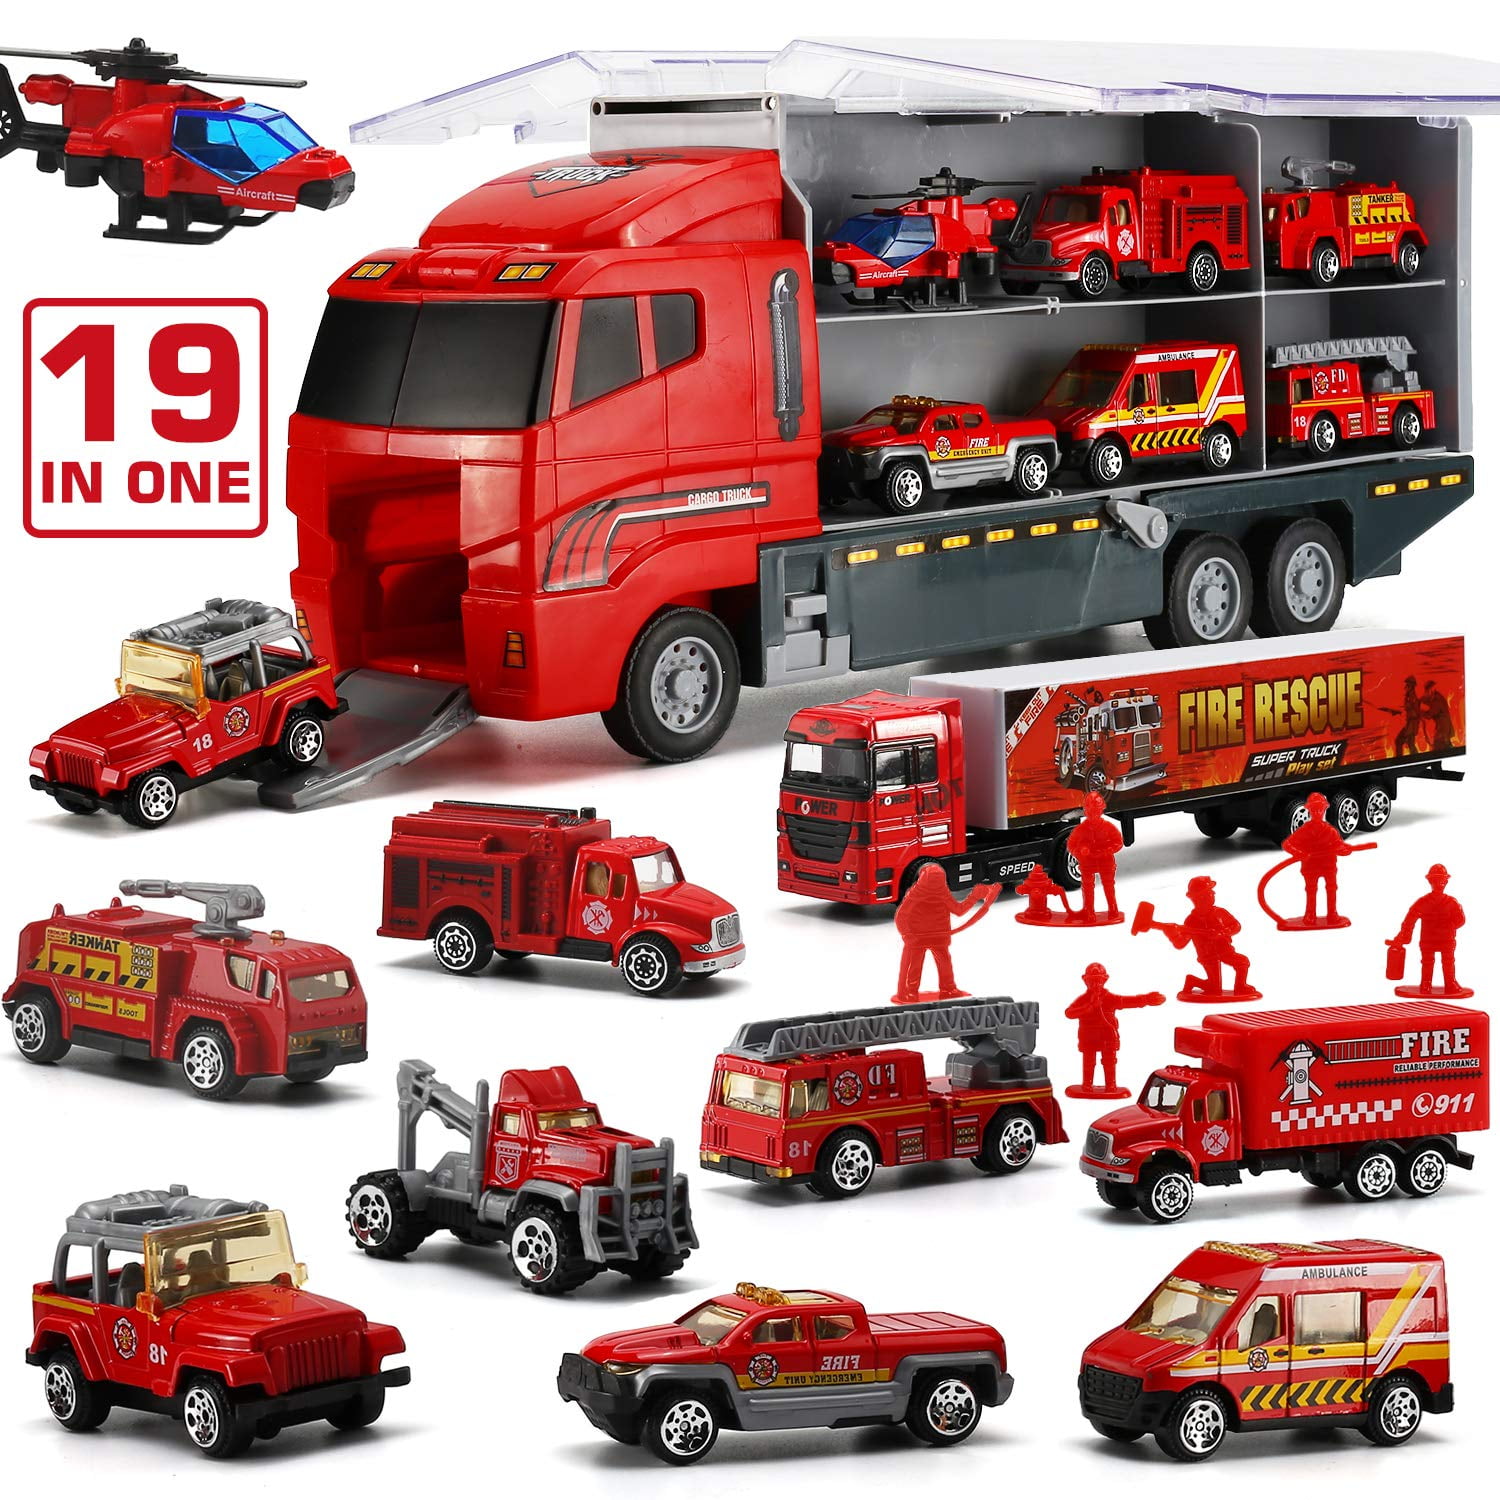 JOYIN 5 Pcs Construction Transport Car Toy Playset with 1 Carrier Truck and 4 Construction Cars Educational Toy Vehicle for Kids Boys Girls Birthday Gift